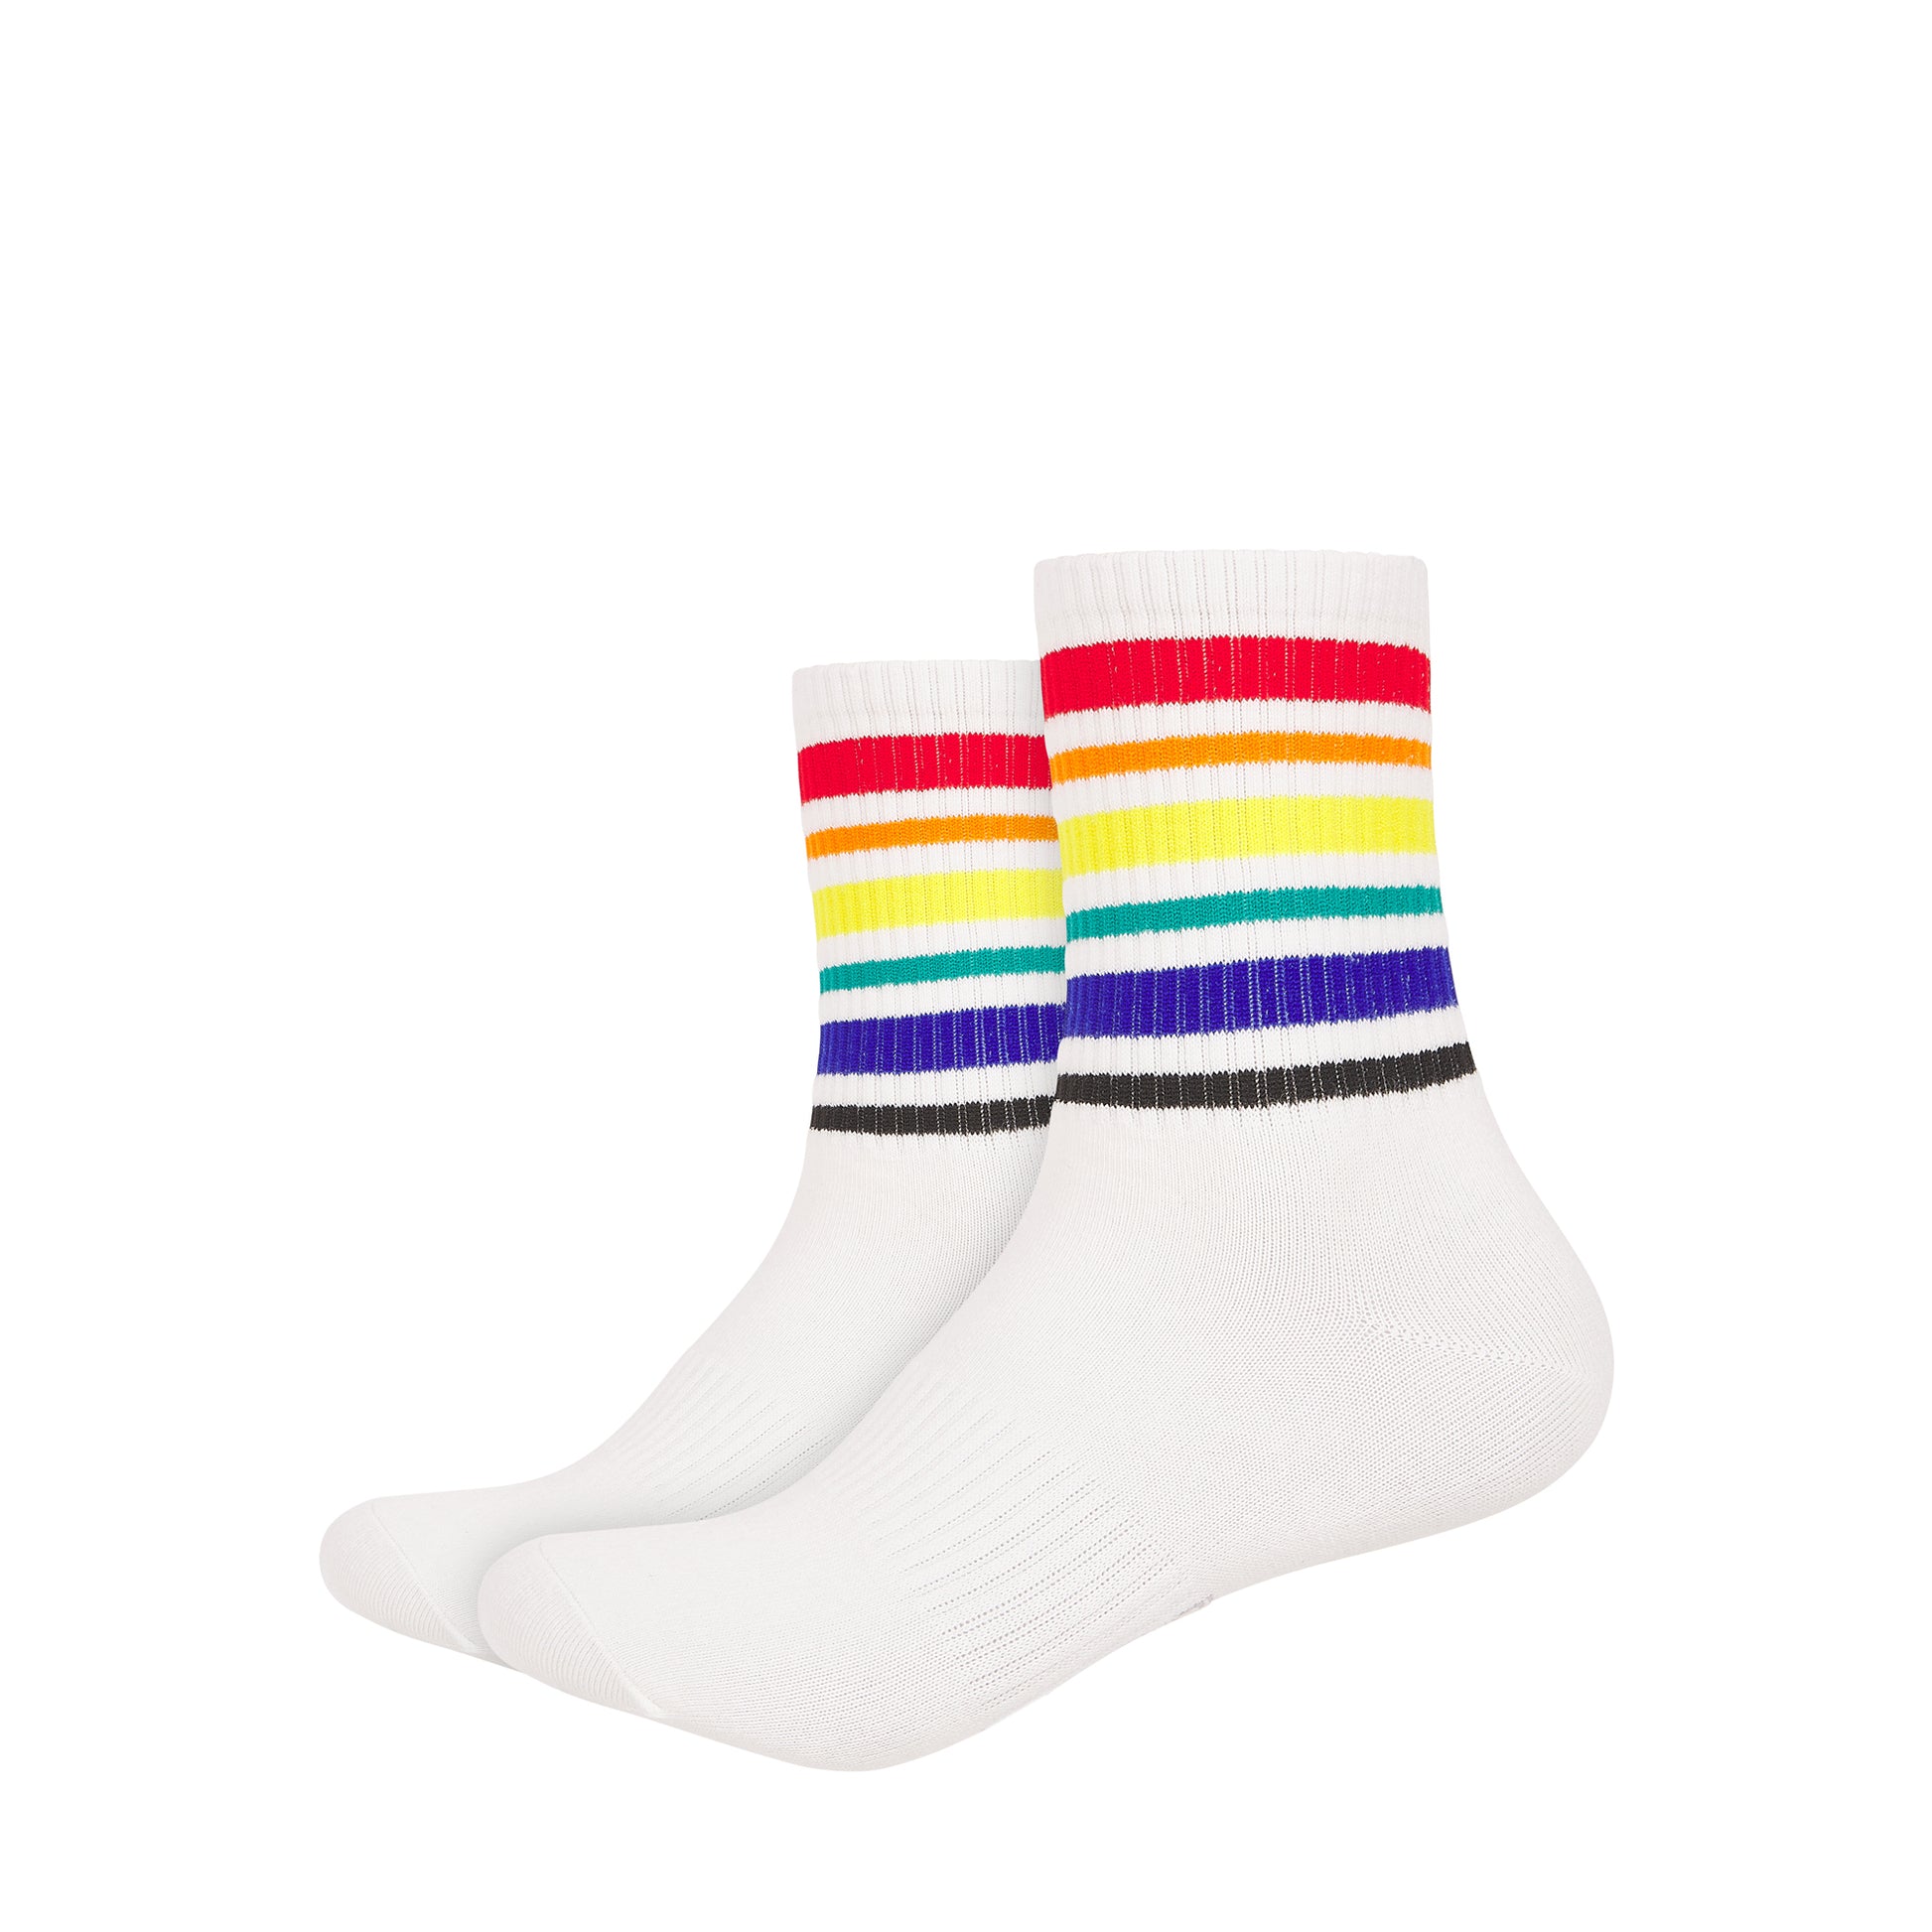 Mens Retro Stripes Crew Length Socks with Arch Support - IDENTITY Apparel Shop